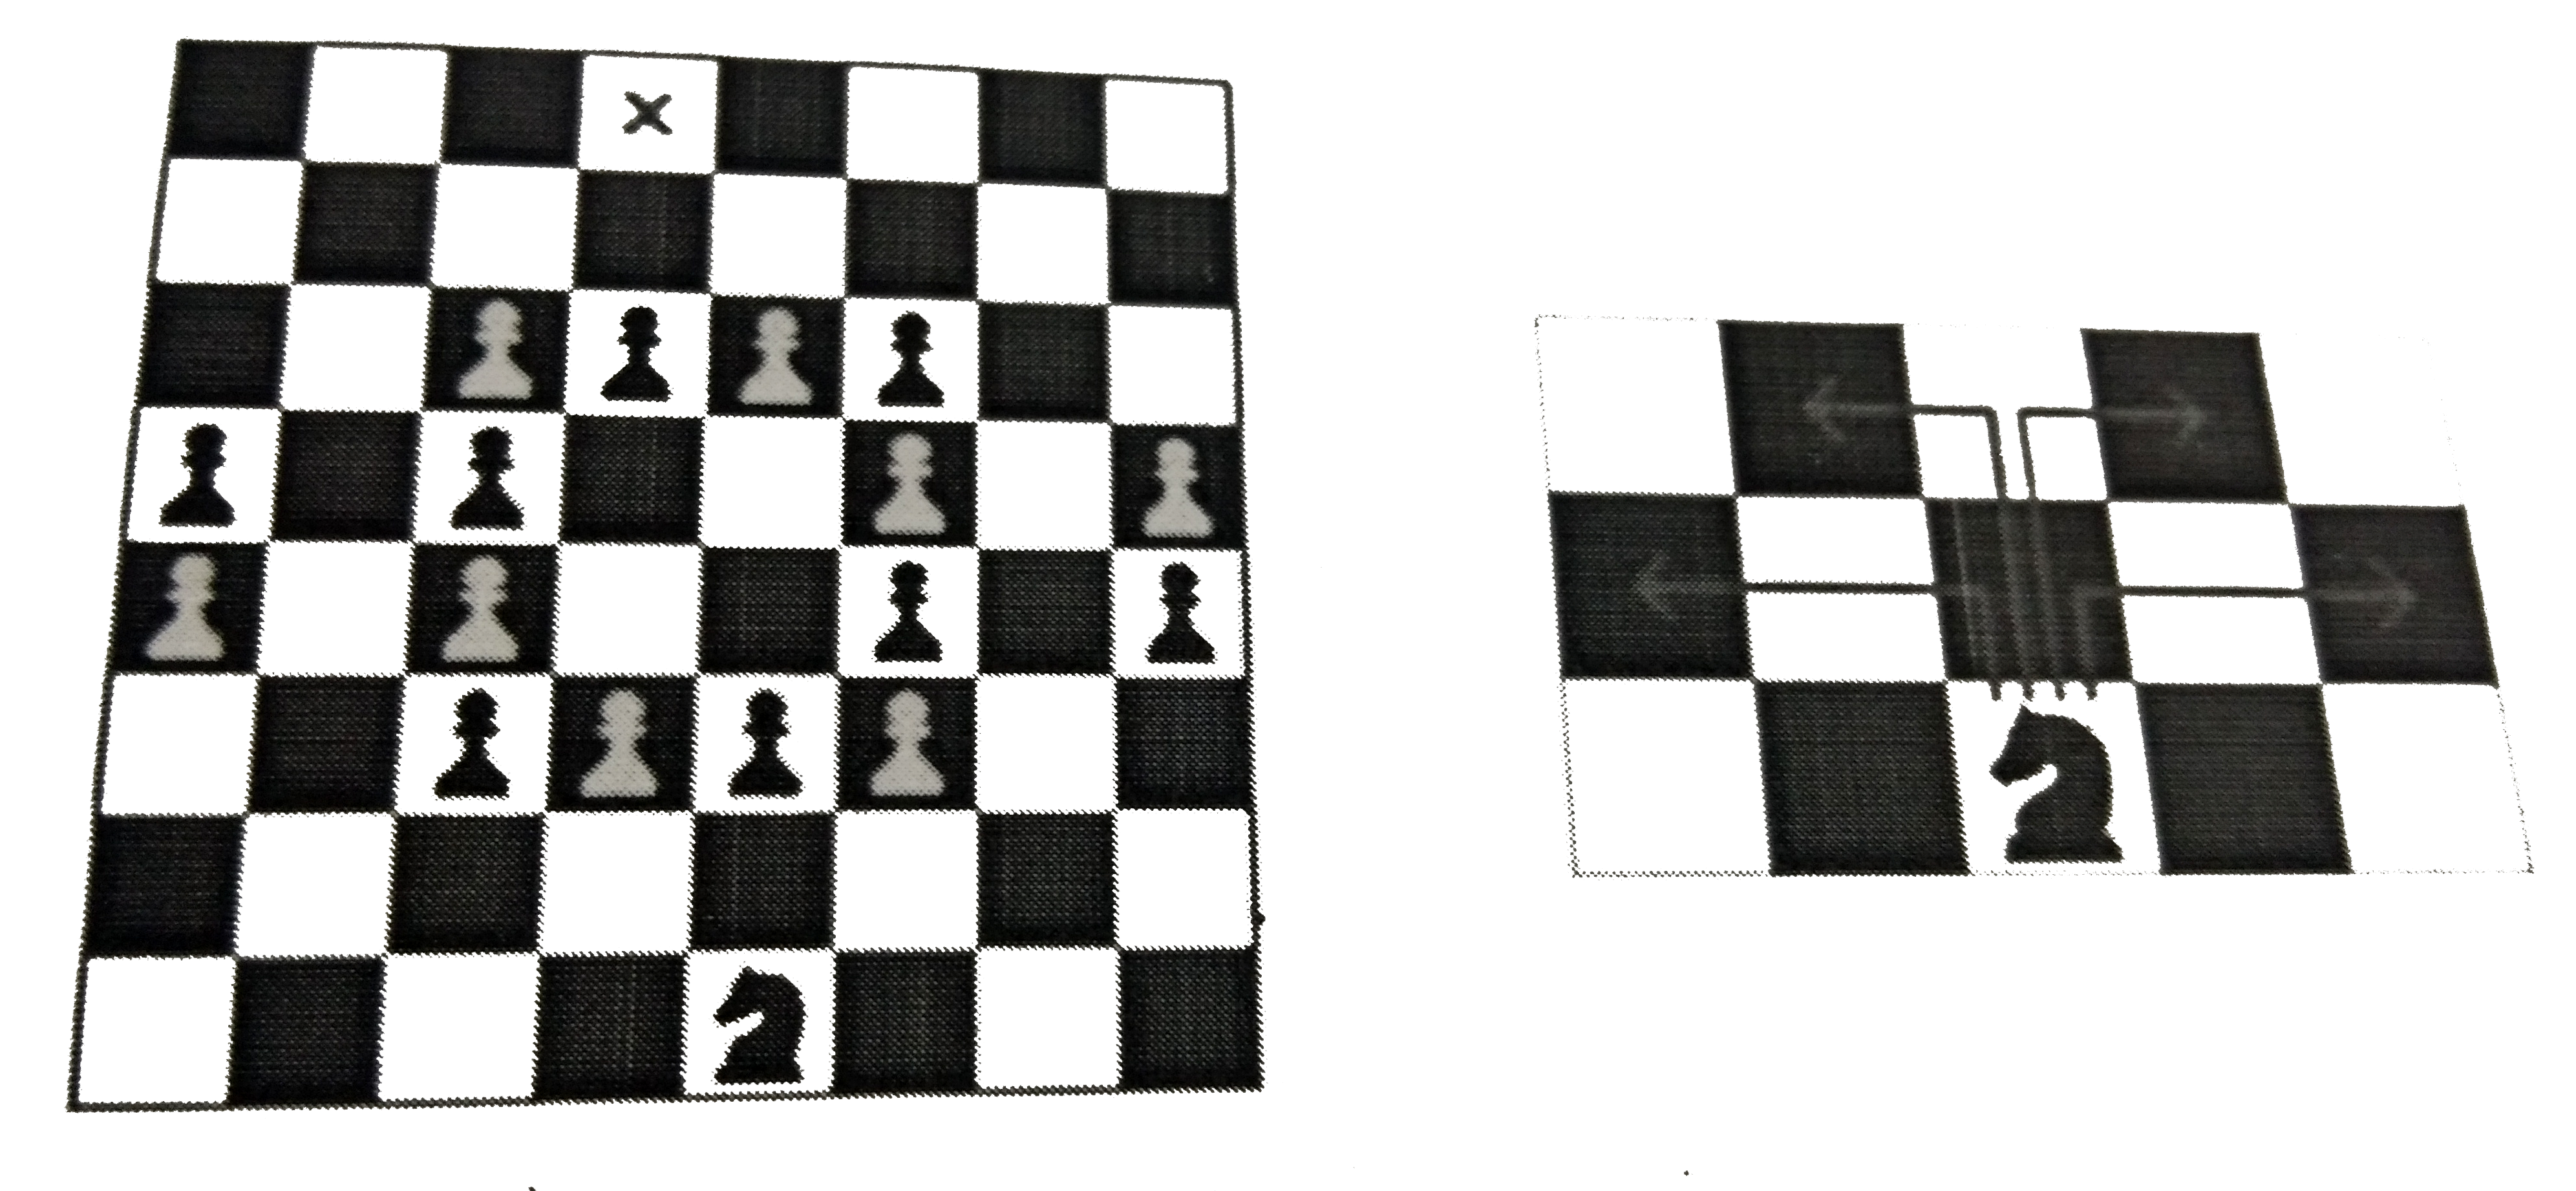 Now, Max is given another chessboard as shown in figure 1. There is only one knight, and there are several pawns. The set of moves a knight can make is shown in figure 2. The knight can jump over a pawn, but cannot land on a square that has a pawn in it. The pawns can not move. Mr. Giovanni asks Max for the least number of steps required to reach the position marked with an X. What is the answer?    Max manages to answer both questions successfully. Thoroughly impressed, Mr. Giovanni sticks to his word. Now armed with 5 extremely powerful Pokémon, Max sets out on his journey to conquer all the Pokémon Gyms and earn his trip to Victory Road